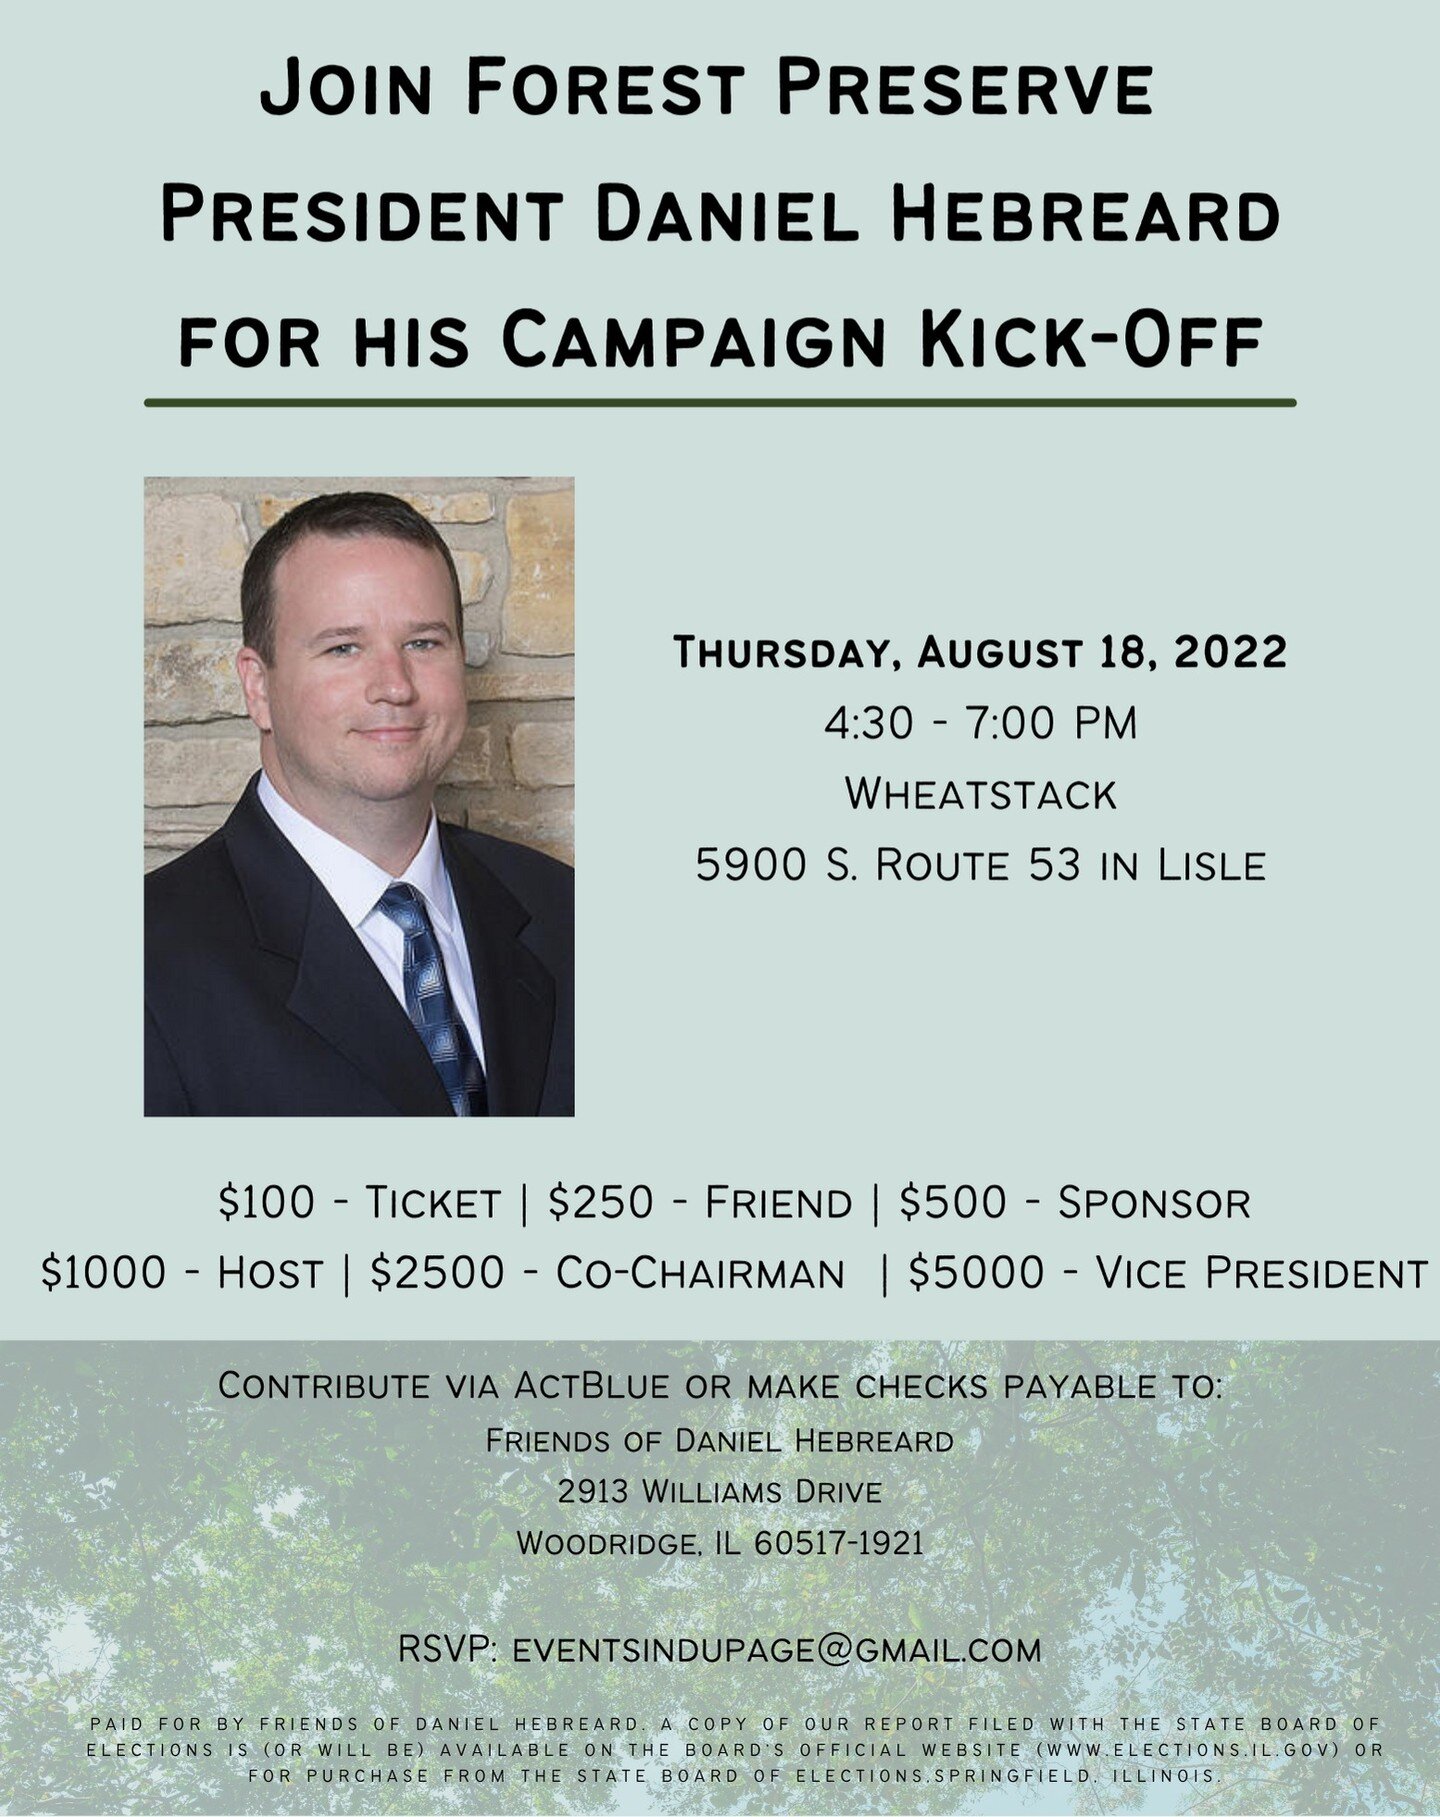 Please join Daniel Hebreard for his campaign kick-off for his Re-Election as President of the Forest Preserve District of DuPage County.

To Purchase tickets, click here: https://secure.actblue.com/donate/fodanh